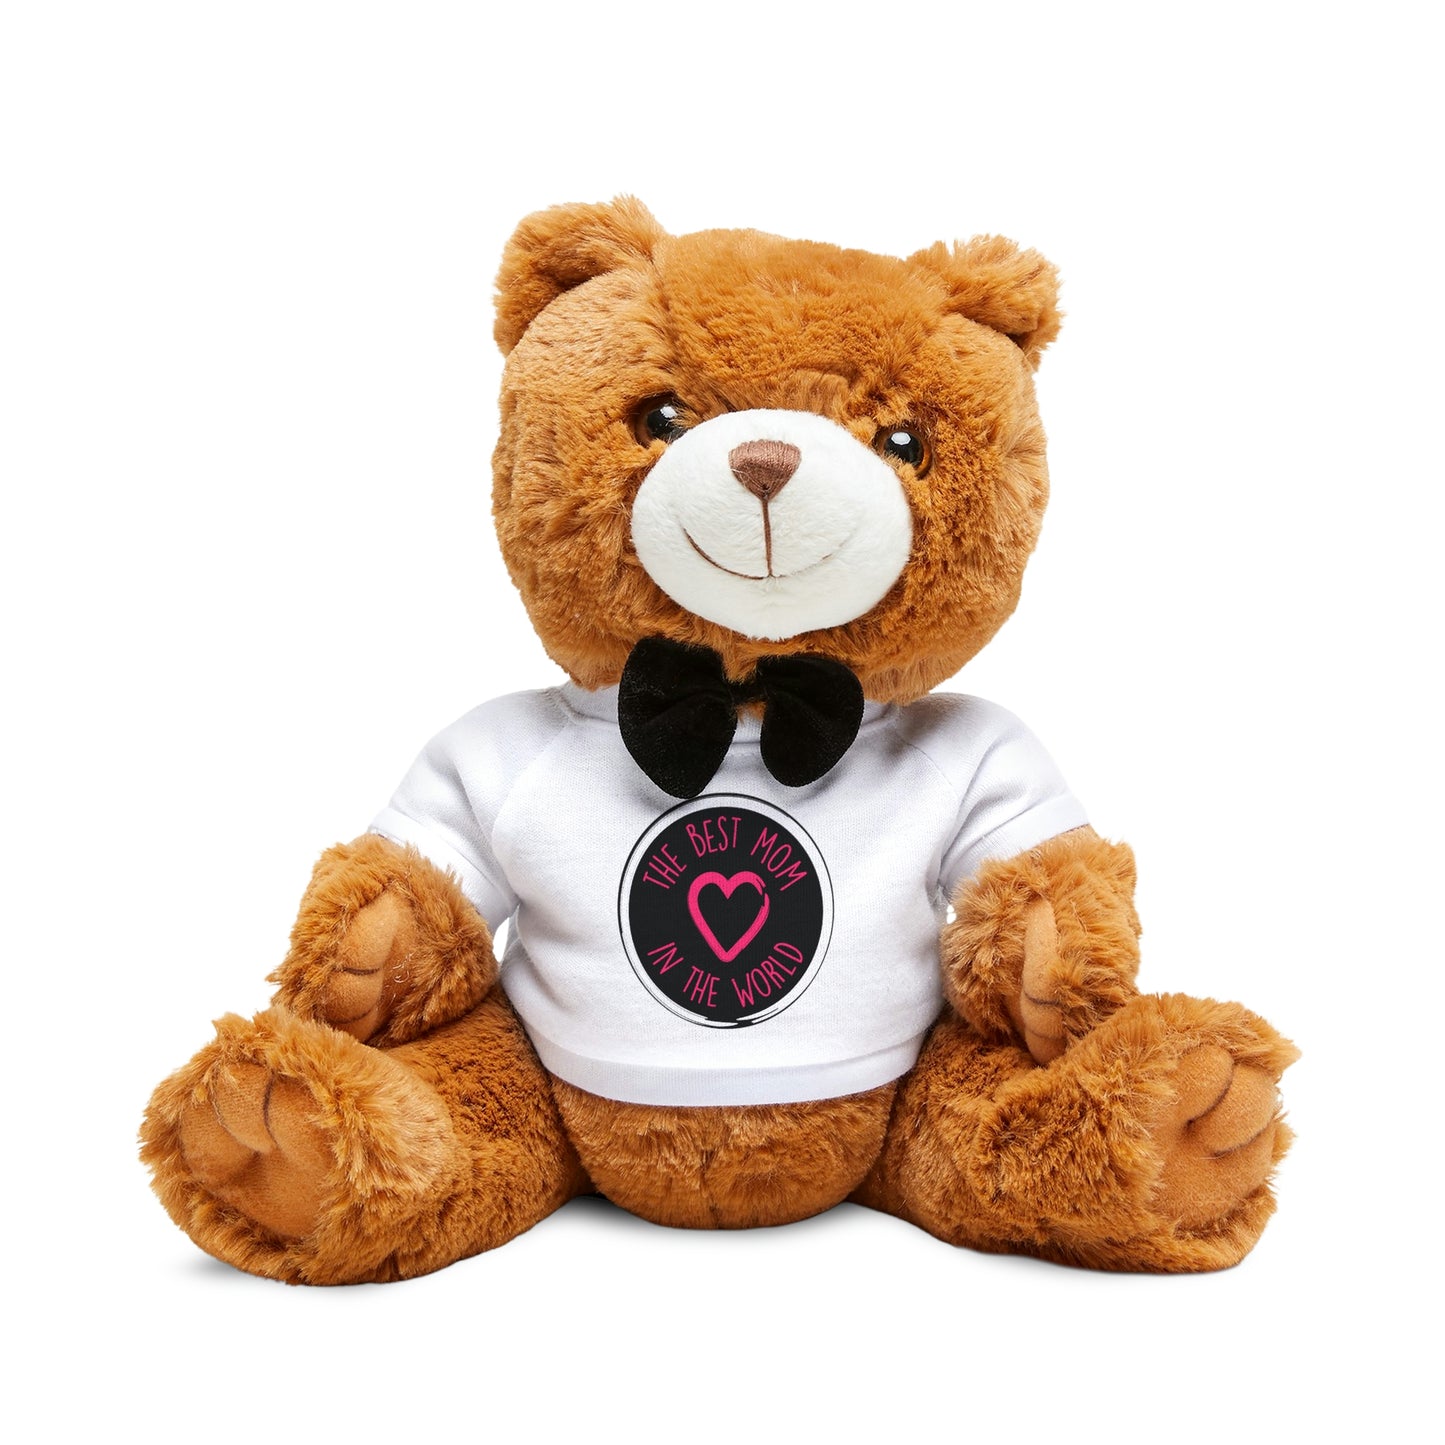 The Best Mom in the World Teddy Bear with T-Shirt